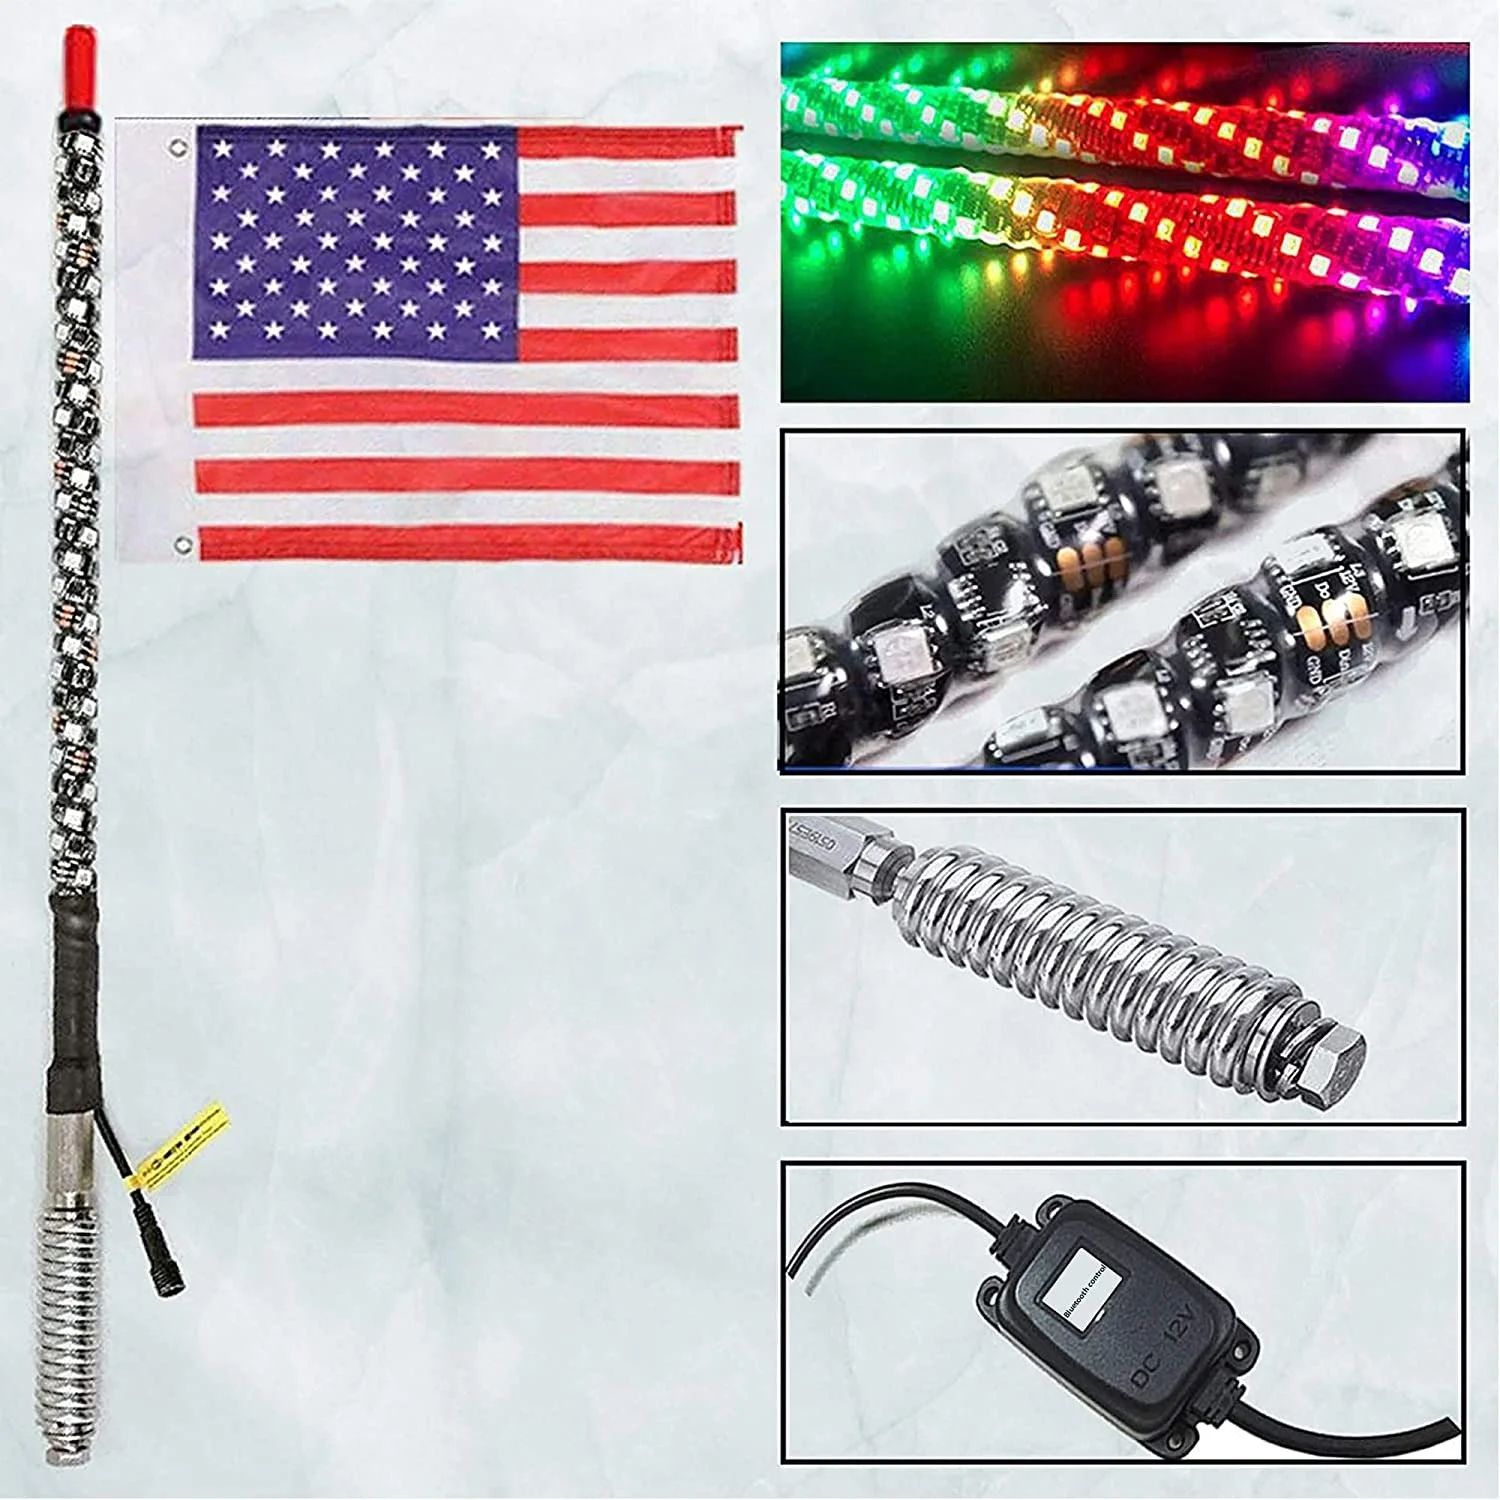 2PCS  Spiral RGB Led Whip Light with Spring Base Chasing Light RF Remote Control Lighted Antenna Whip for Can am ATV UTV RZR